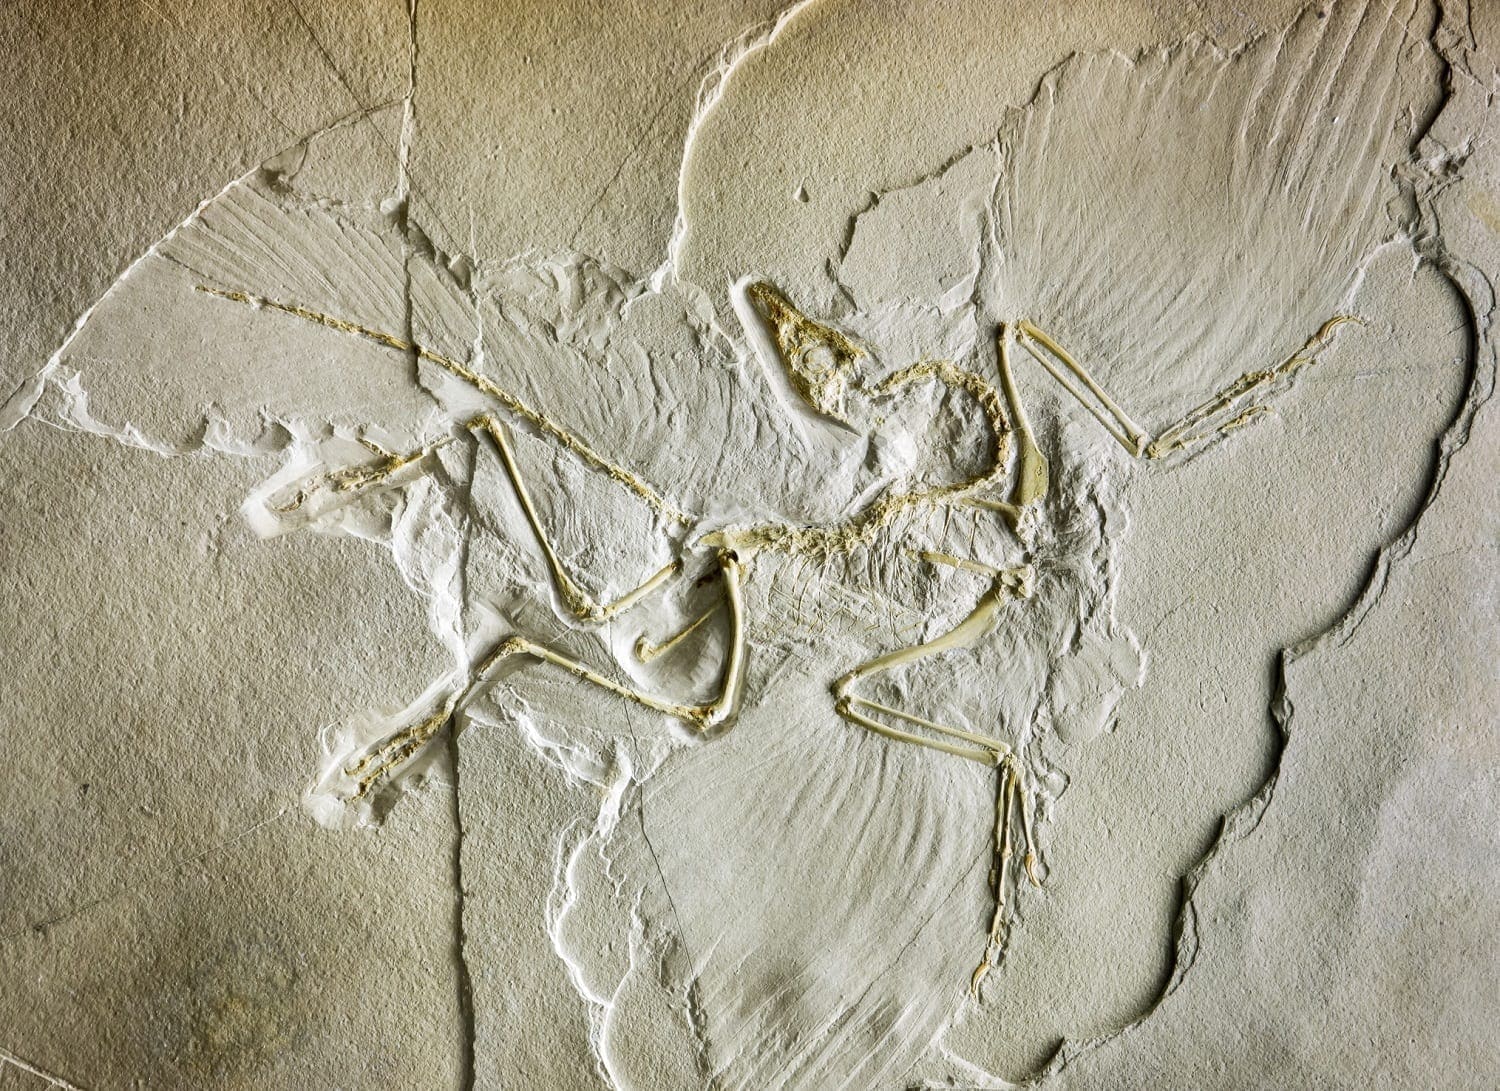 Archaeopteryx fossil incased in stone, Germany: ID 63404569 © Mikhailsh | Dreamstime.com